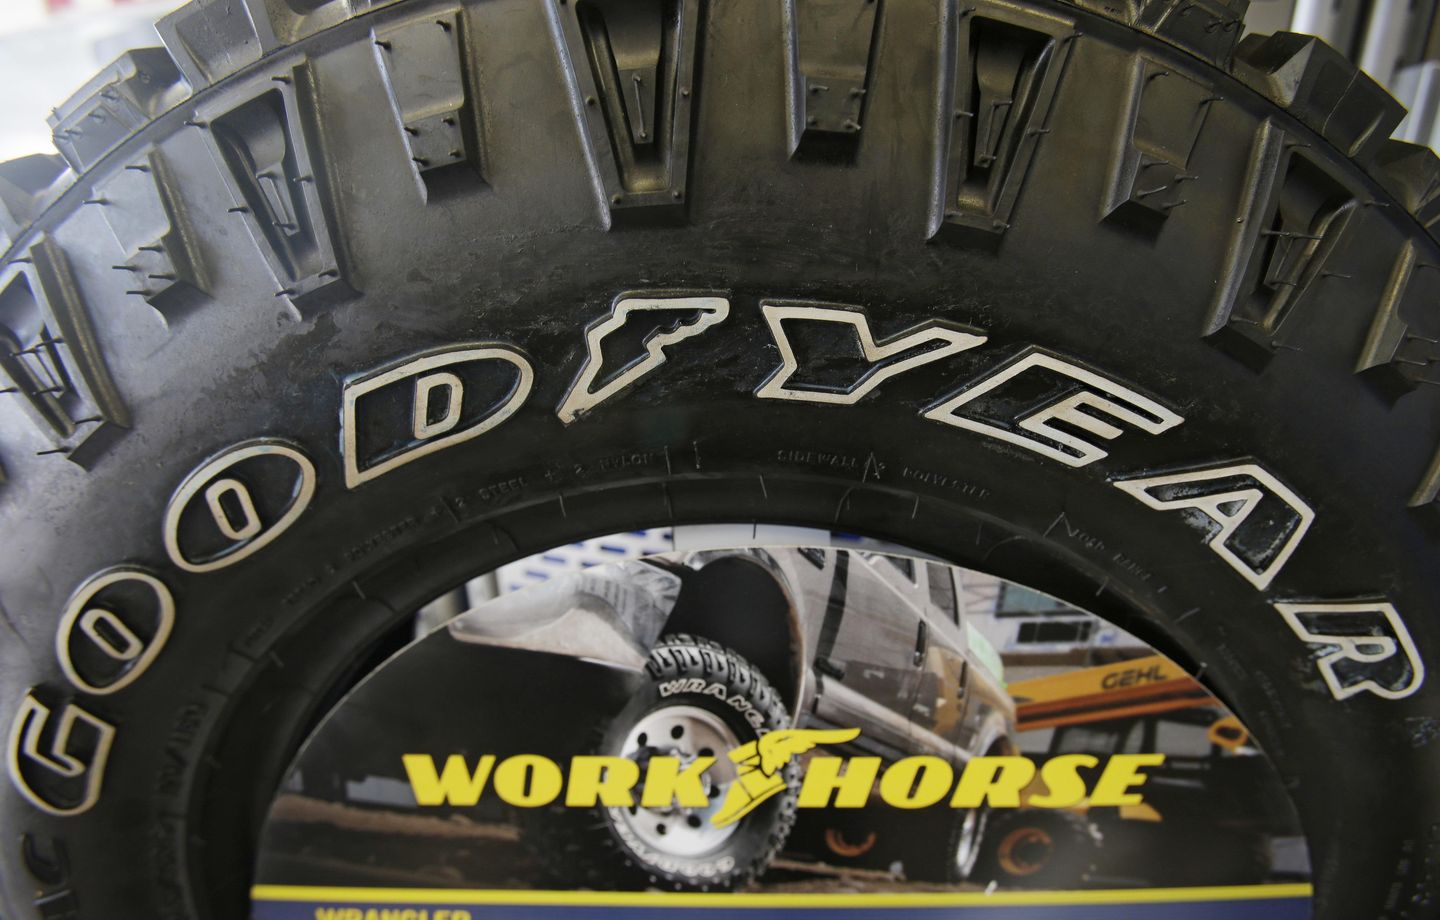 Business News: Grand jury probes faulty Goodyear recreational vehicle tires